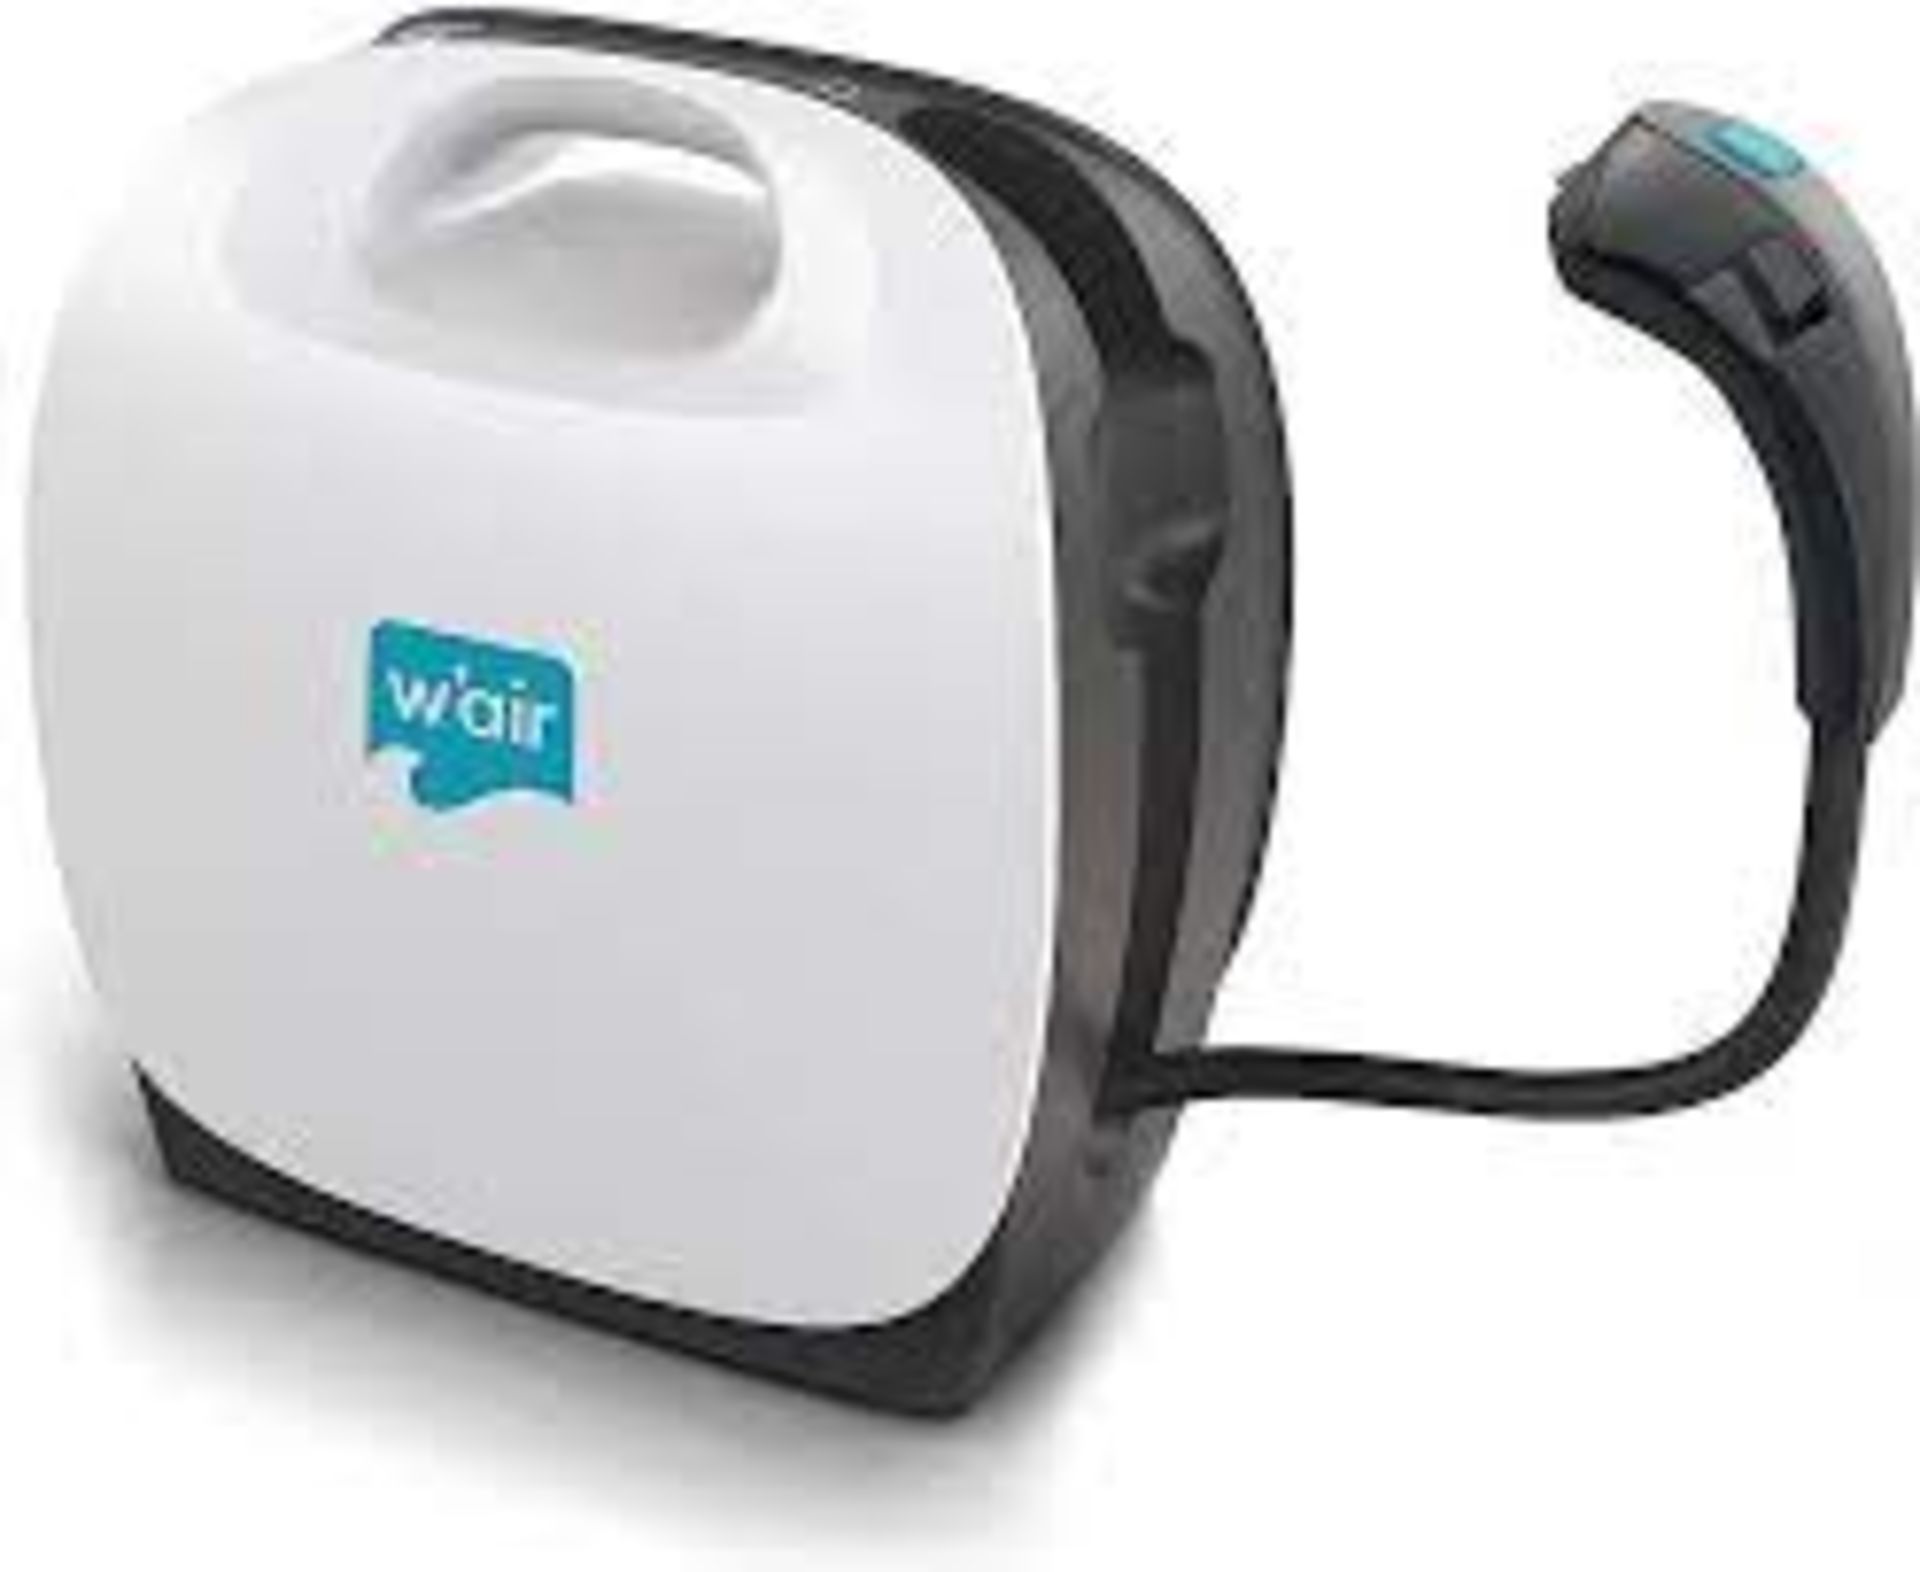 5 X BRAND NEW W'AIR SNEAKER CLEANING SYSTEMS RRP £299, The w'air uses hydrodynamic technology - Image 6 of 6